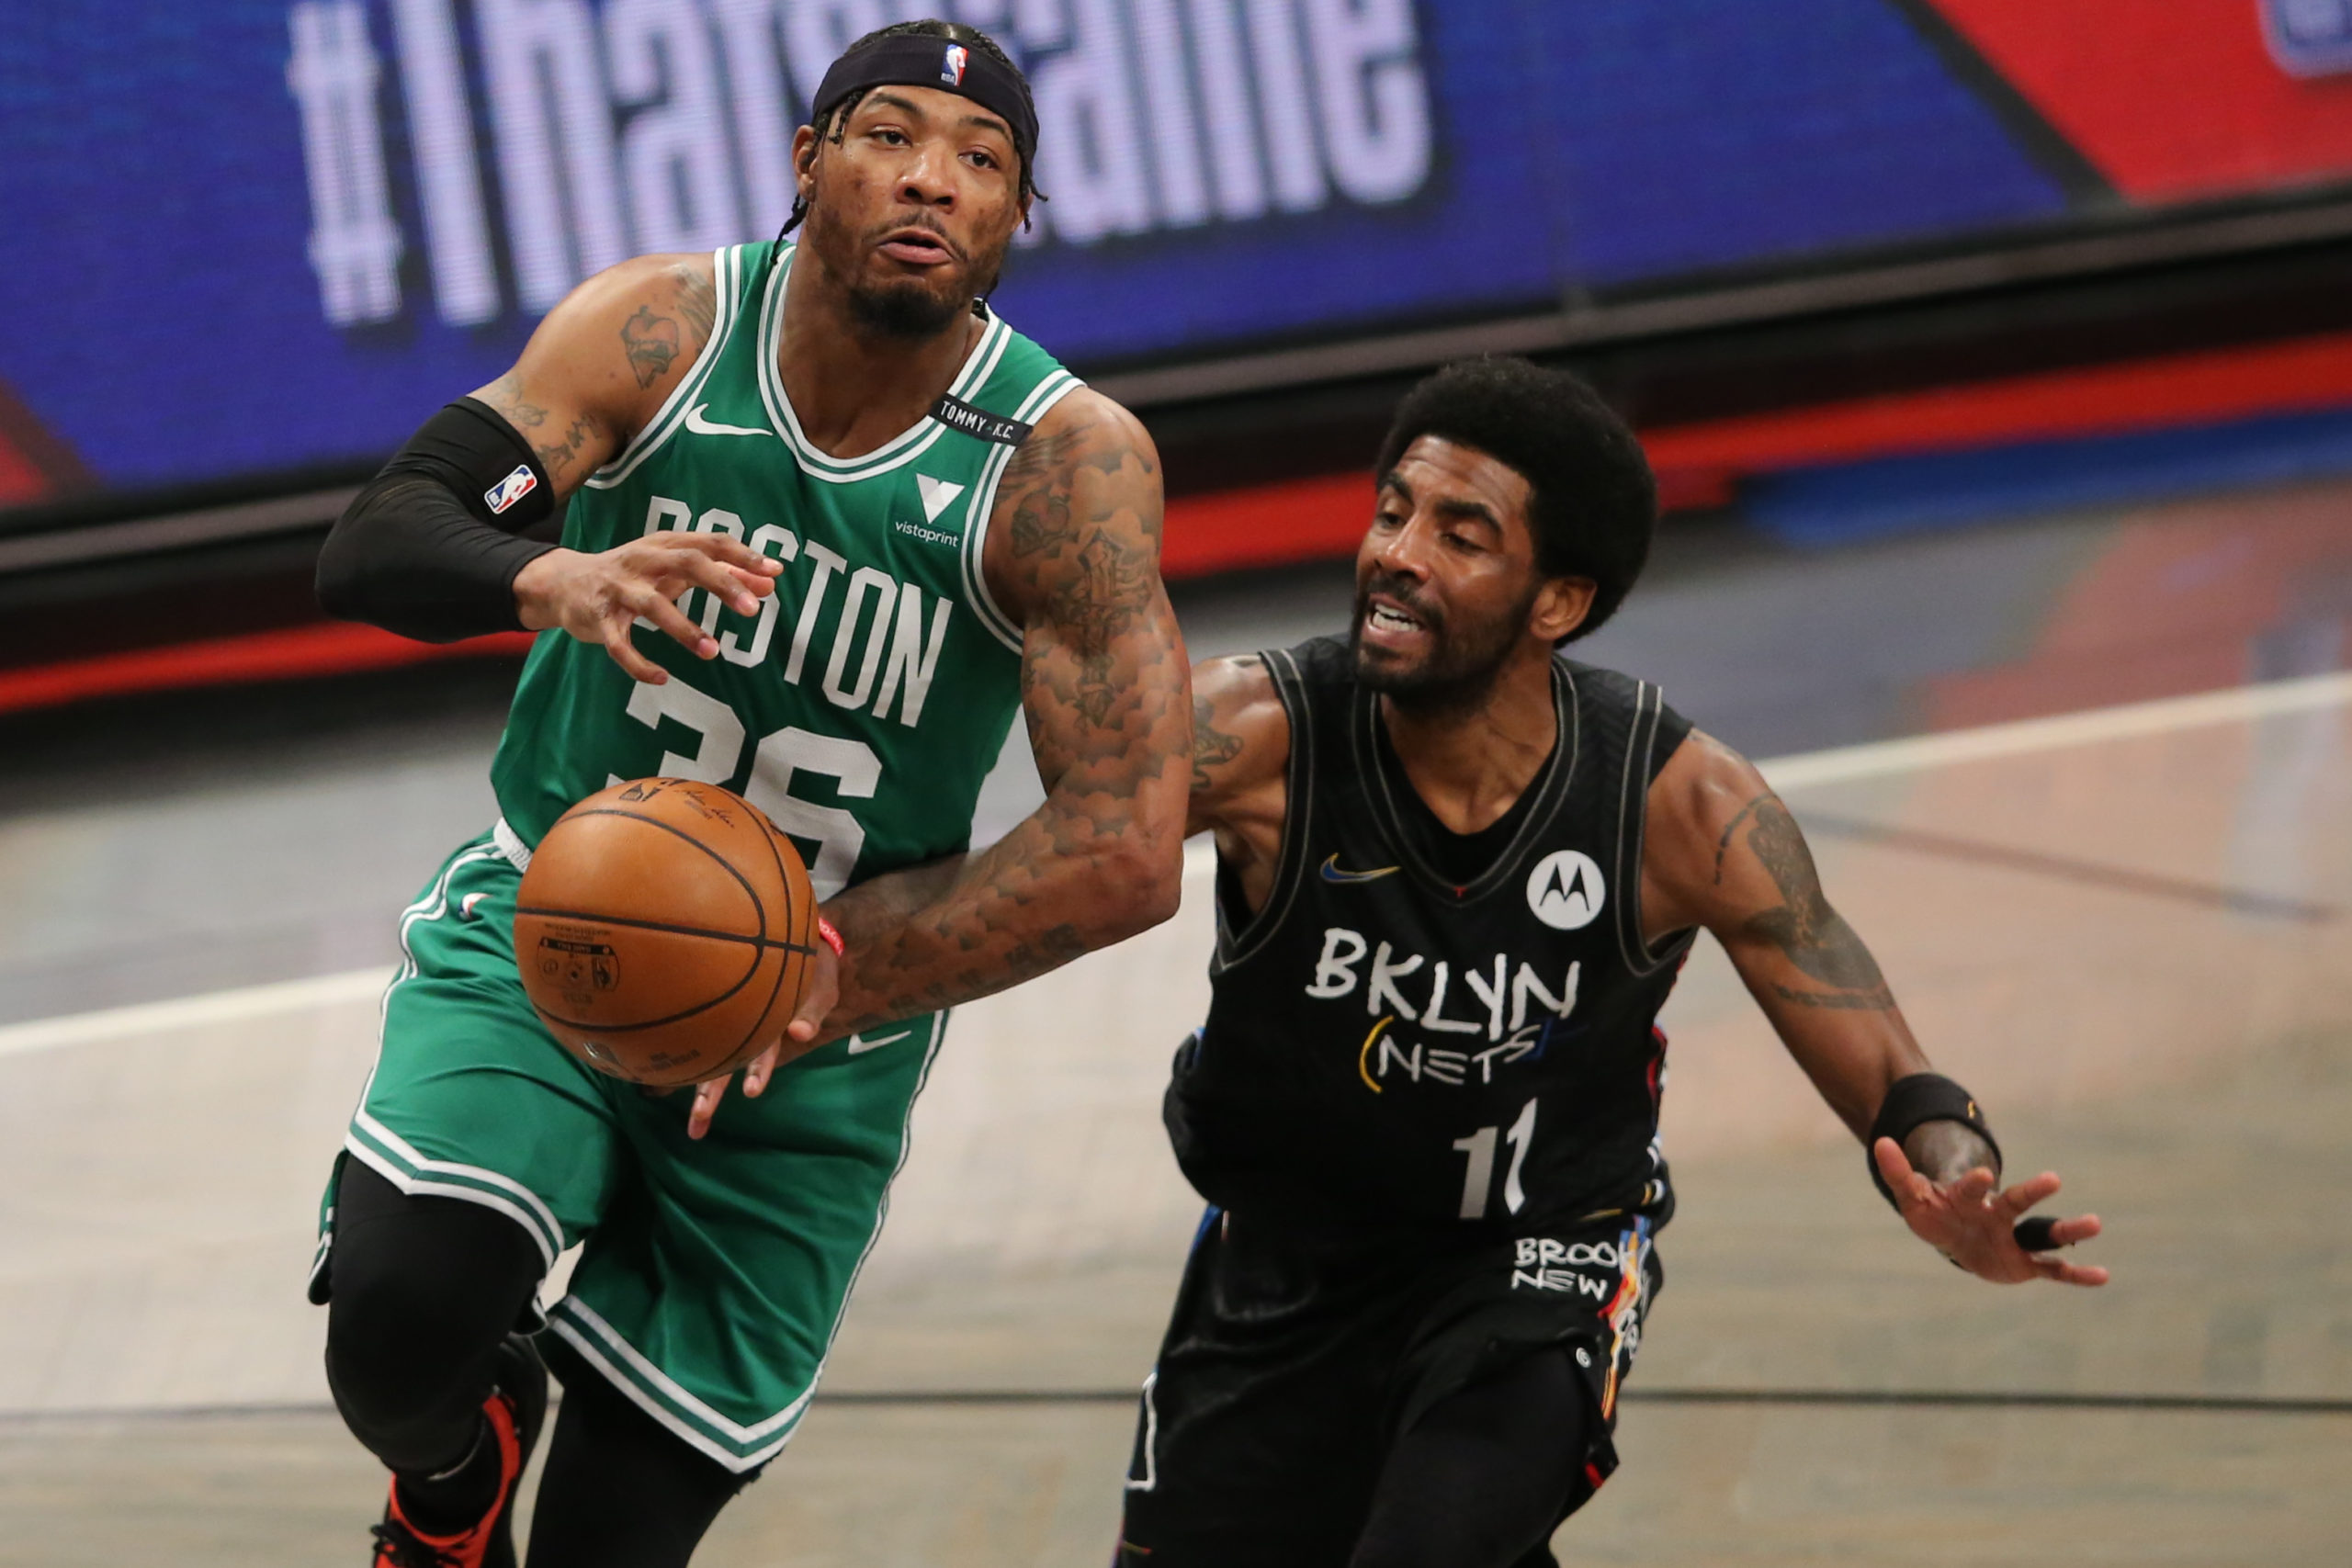 Brooklyn Nets point guard Kyrie Irving (11) strips the ball from Boston Celtics point guard Marcus Smart